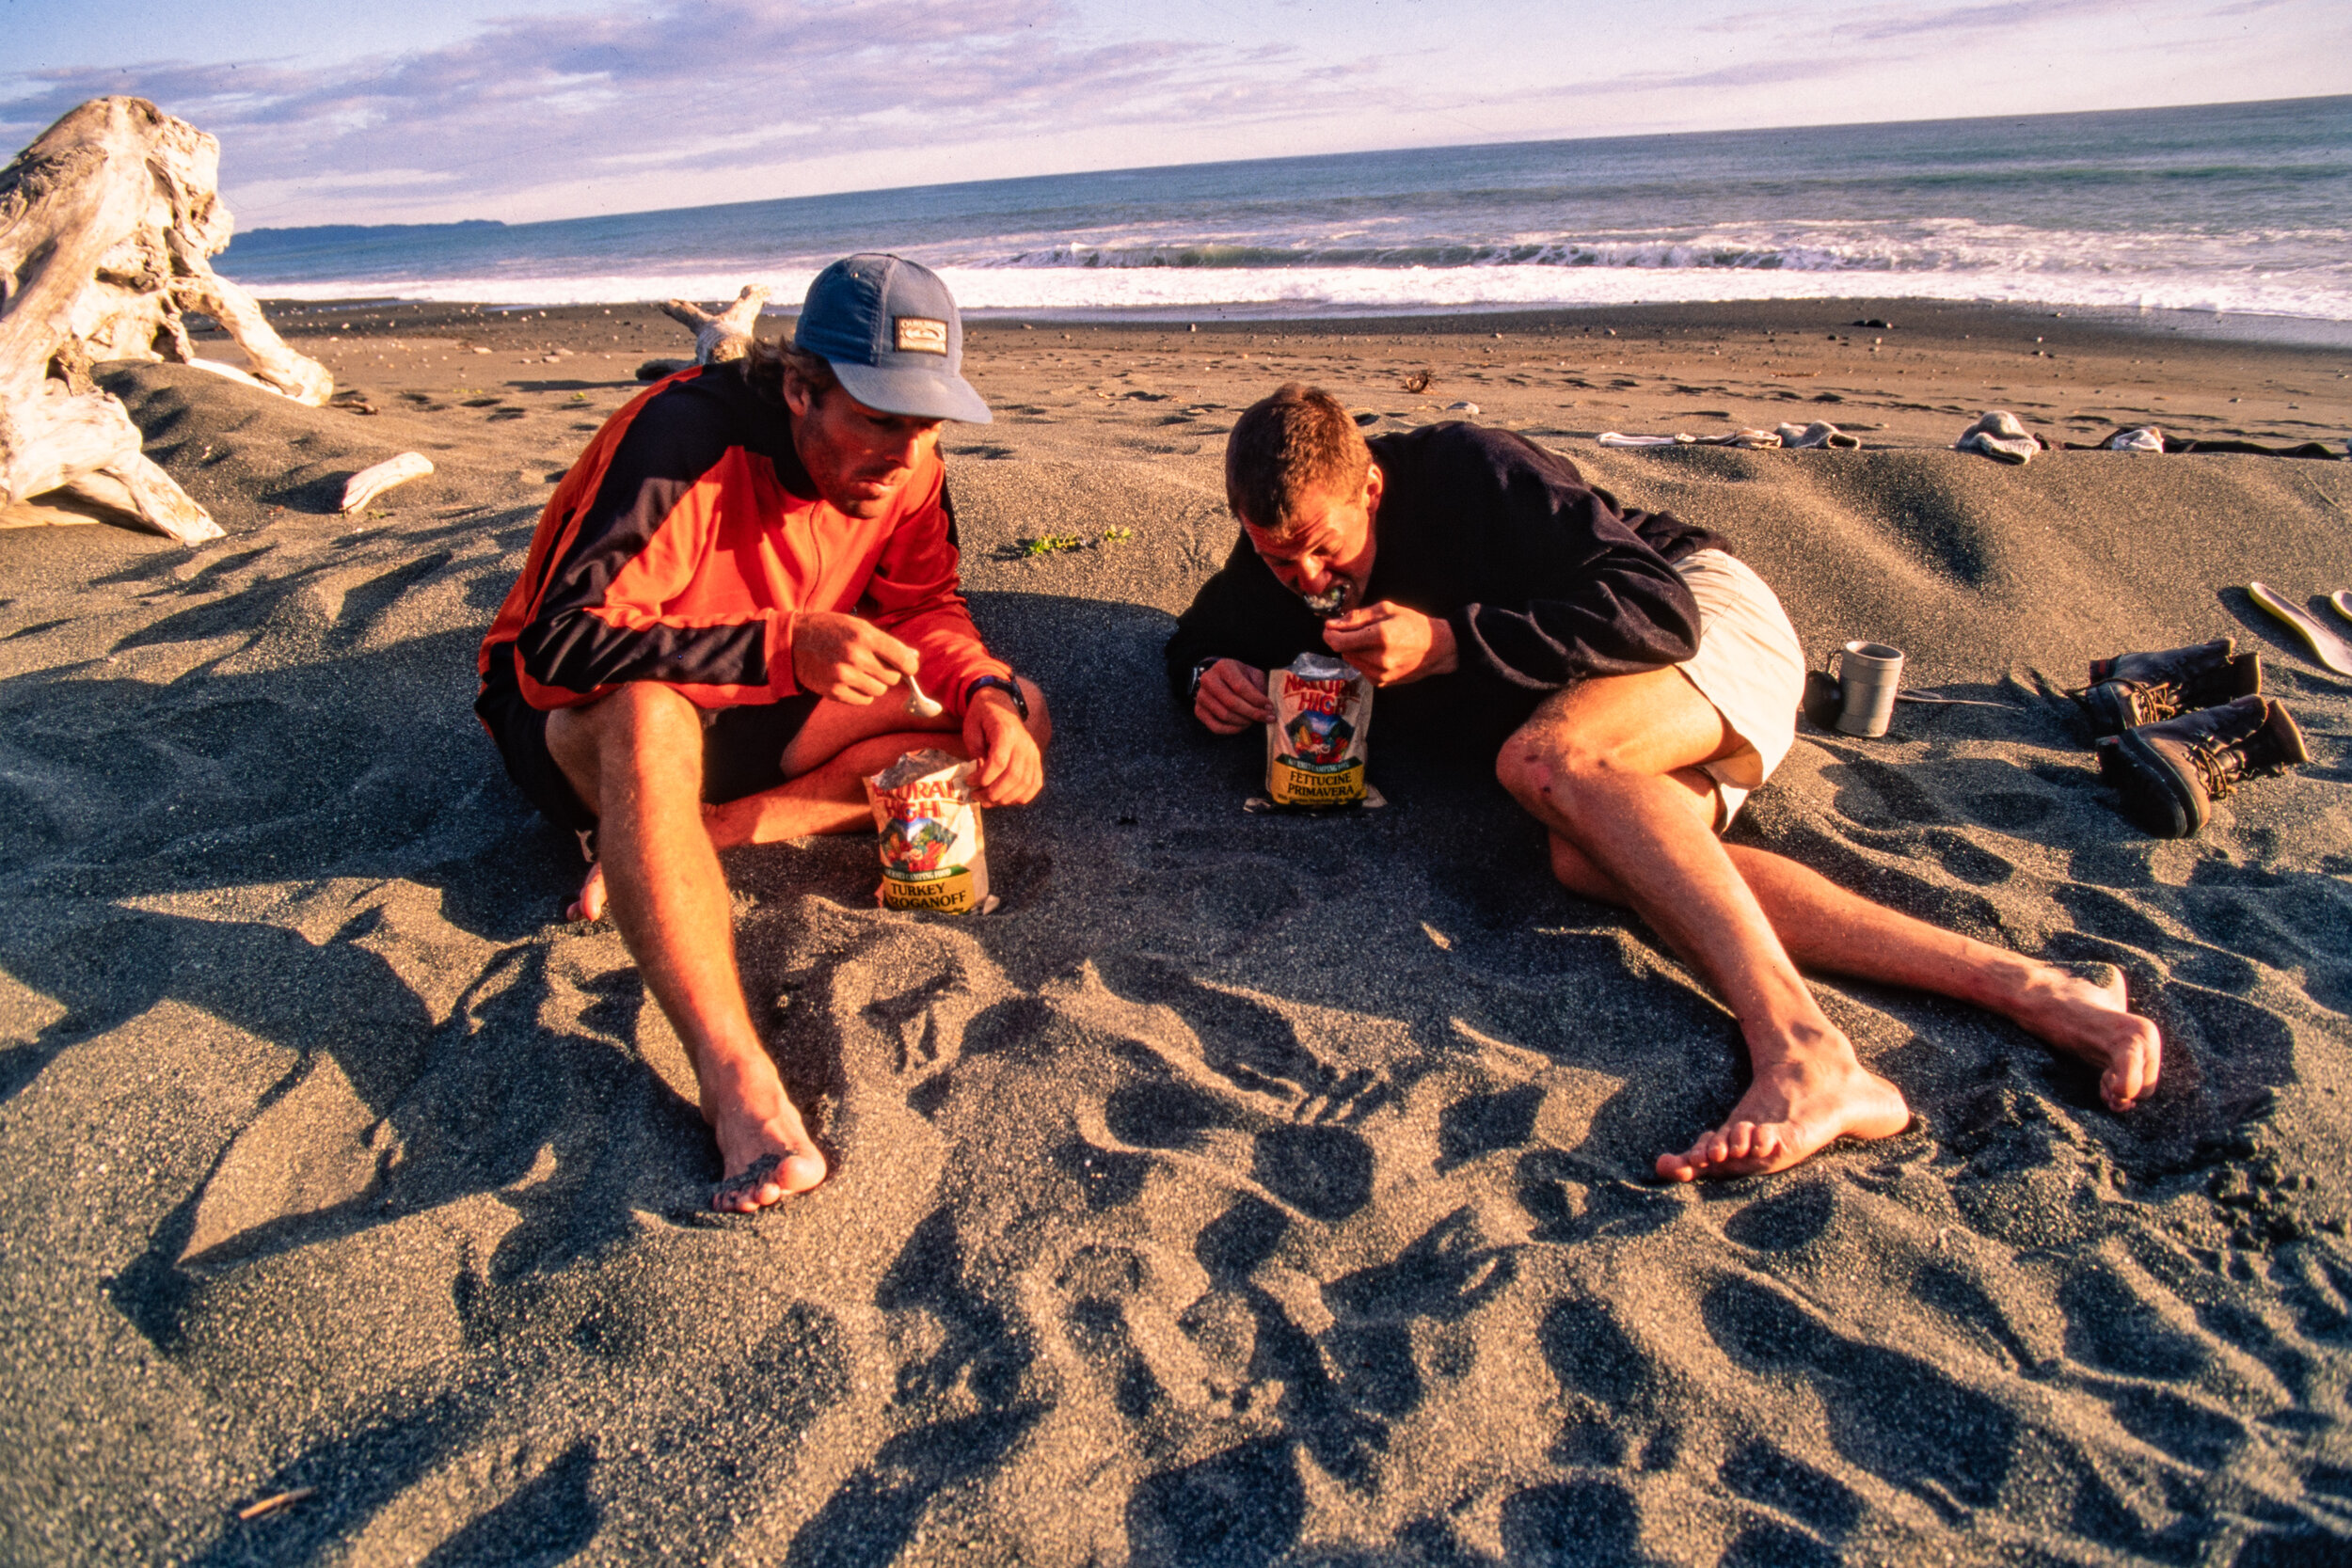  Tom and Rupert fueling up and airing their feet out. Evenings on the beach were magical if the sun was out. Look closely and you will see a little stream in the back left corner of this photo. As waves came up the beach salmon would make a break for